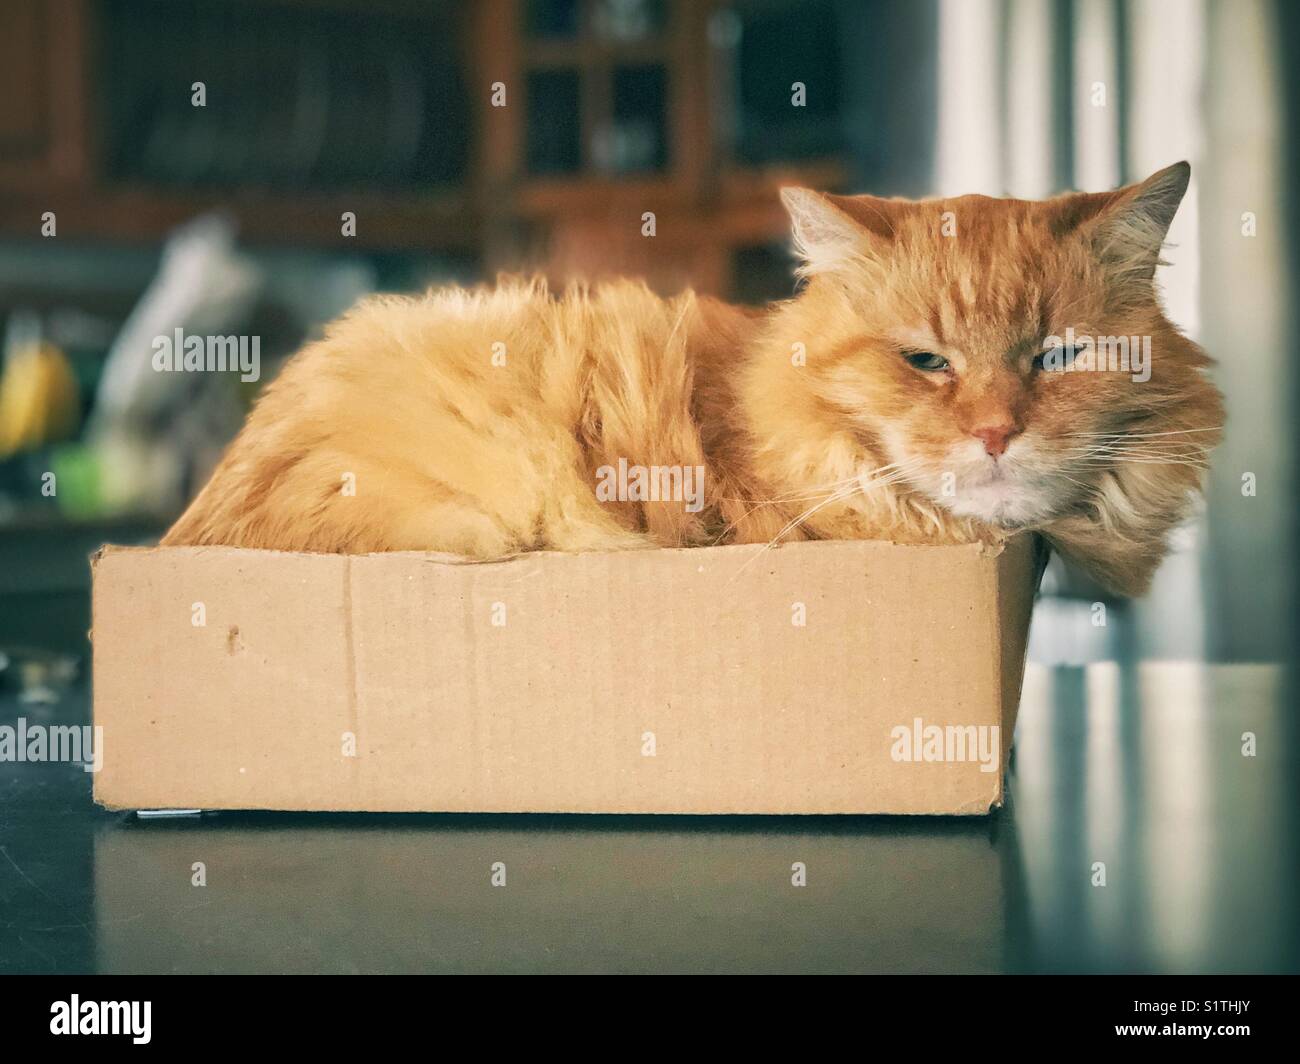 A big orange cat in a little cardboard box on a kitchen counter Stock Photo